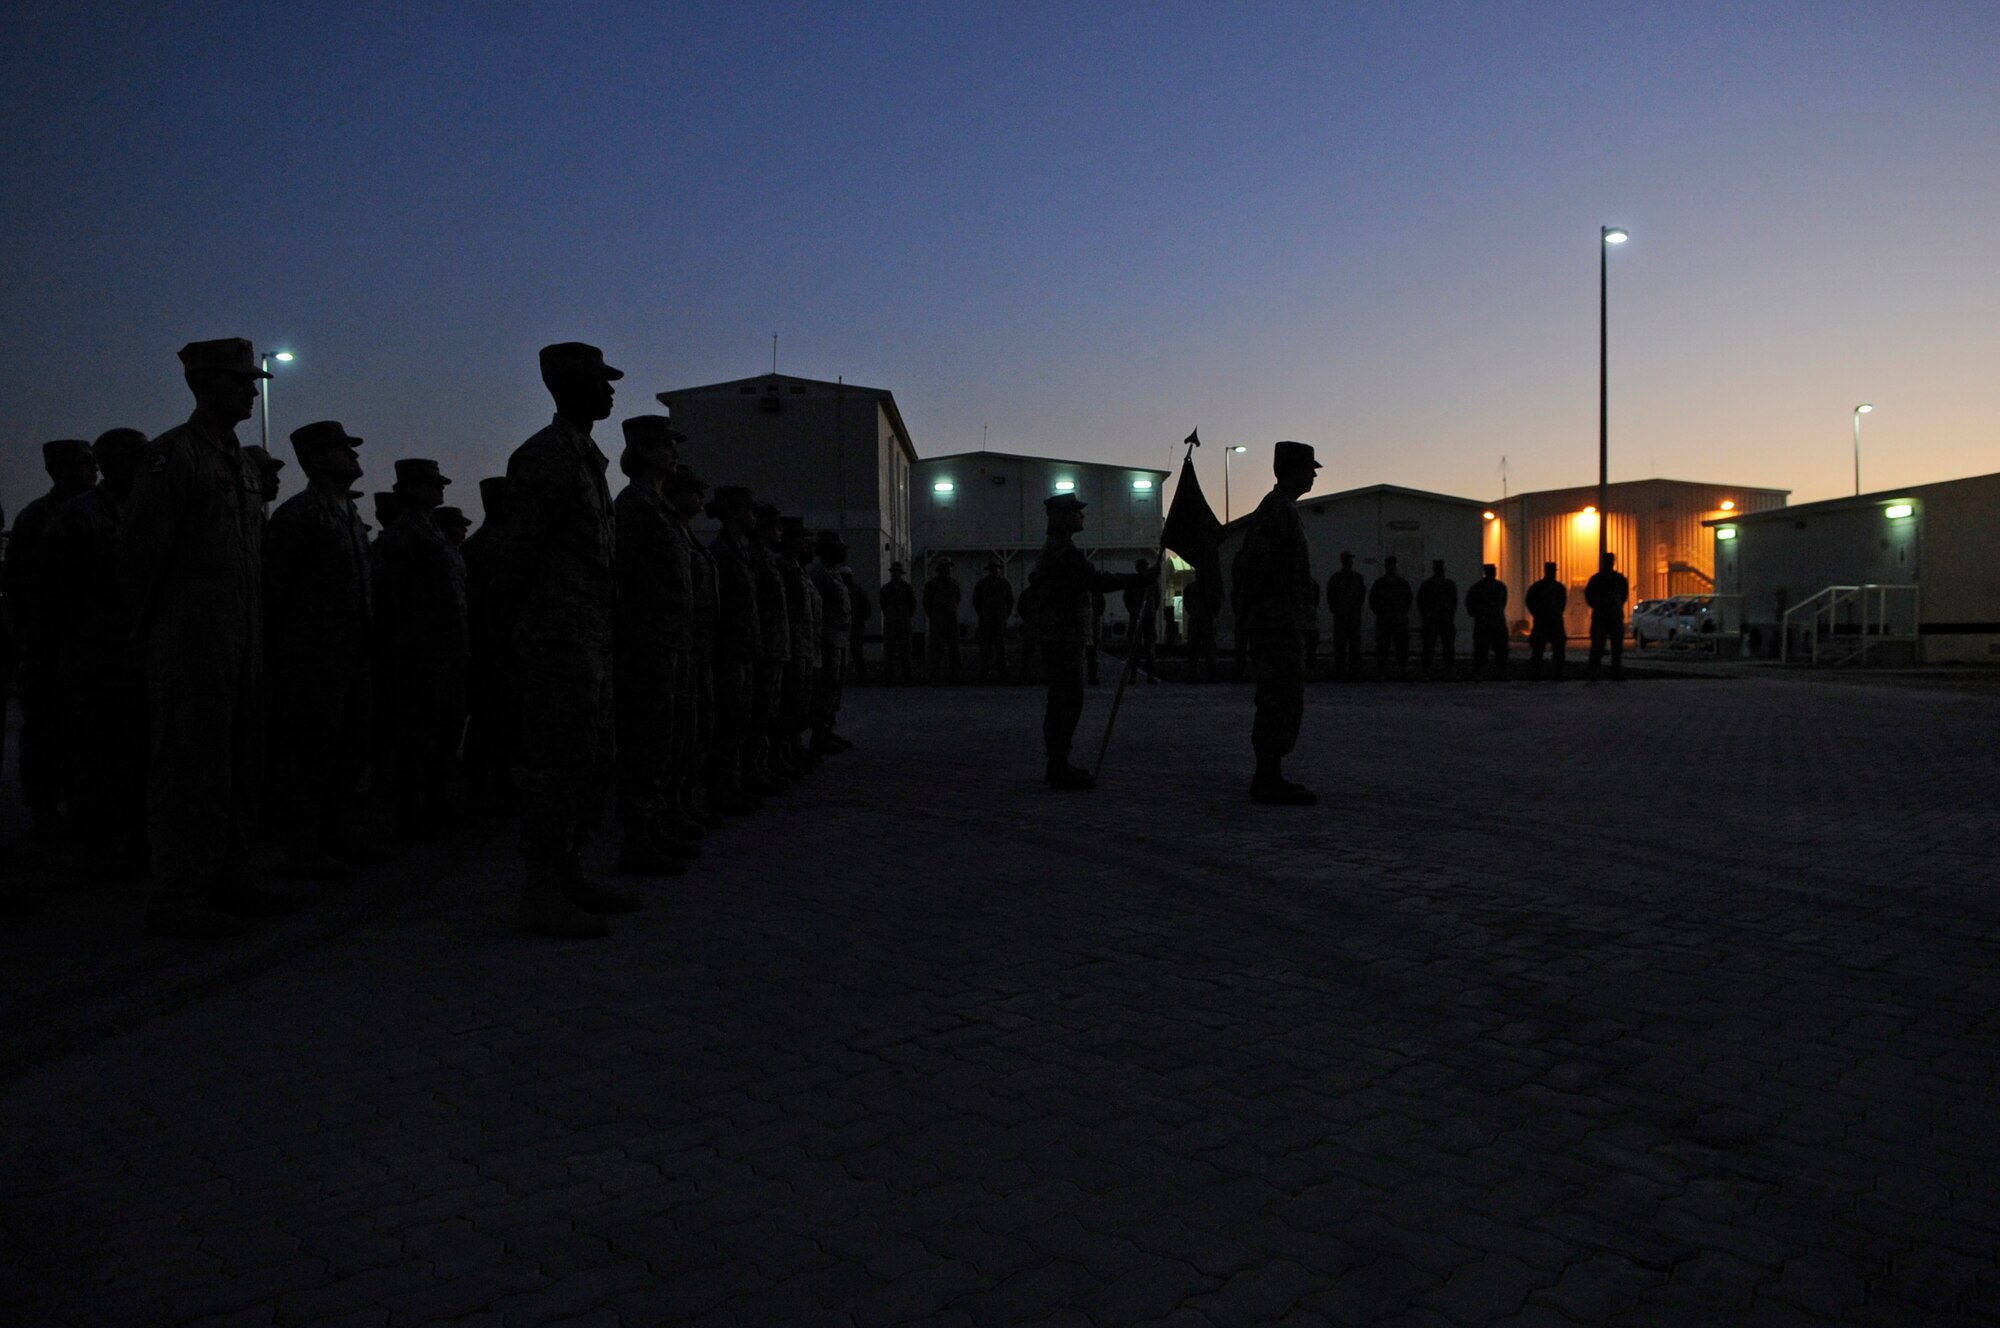 SOUTHWEST ASIA - Members of the 380th Air Expeditionary Wing stand in formation during a Retreat ceremony honoring Veterans Day, Nov. 11, 2009. Veterans Day, formerly known as Armistice Day, was originally set as a U.S. legal holiday to honor the end of World War I, which officially took place on November 11, 1918. (U.S. Air Force photo/Senior Airman Stephen Linch)